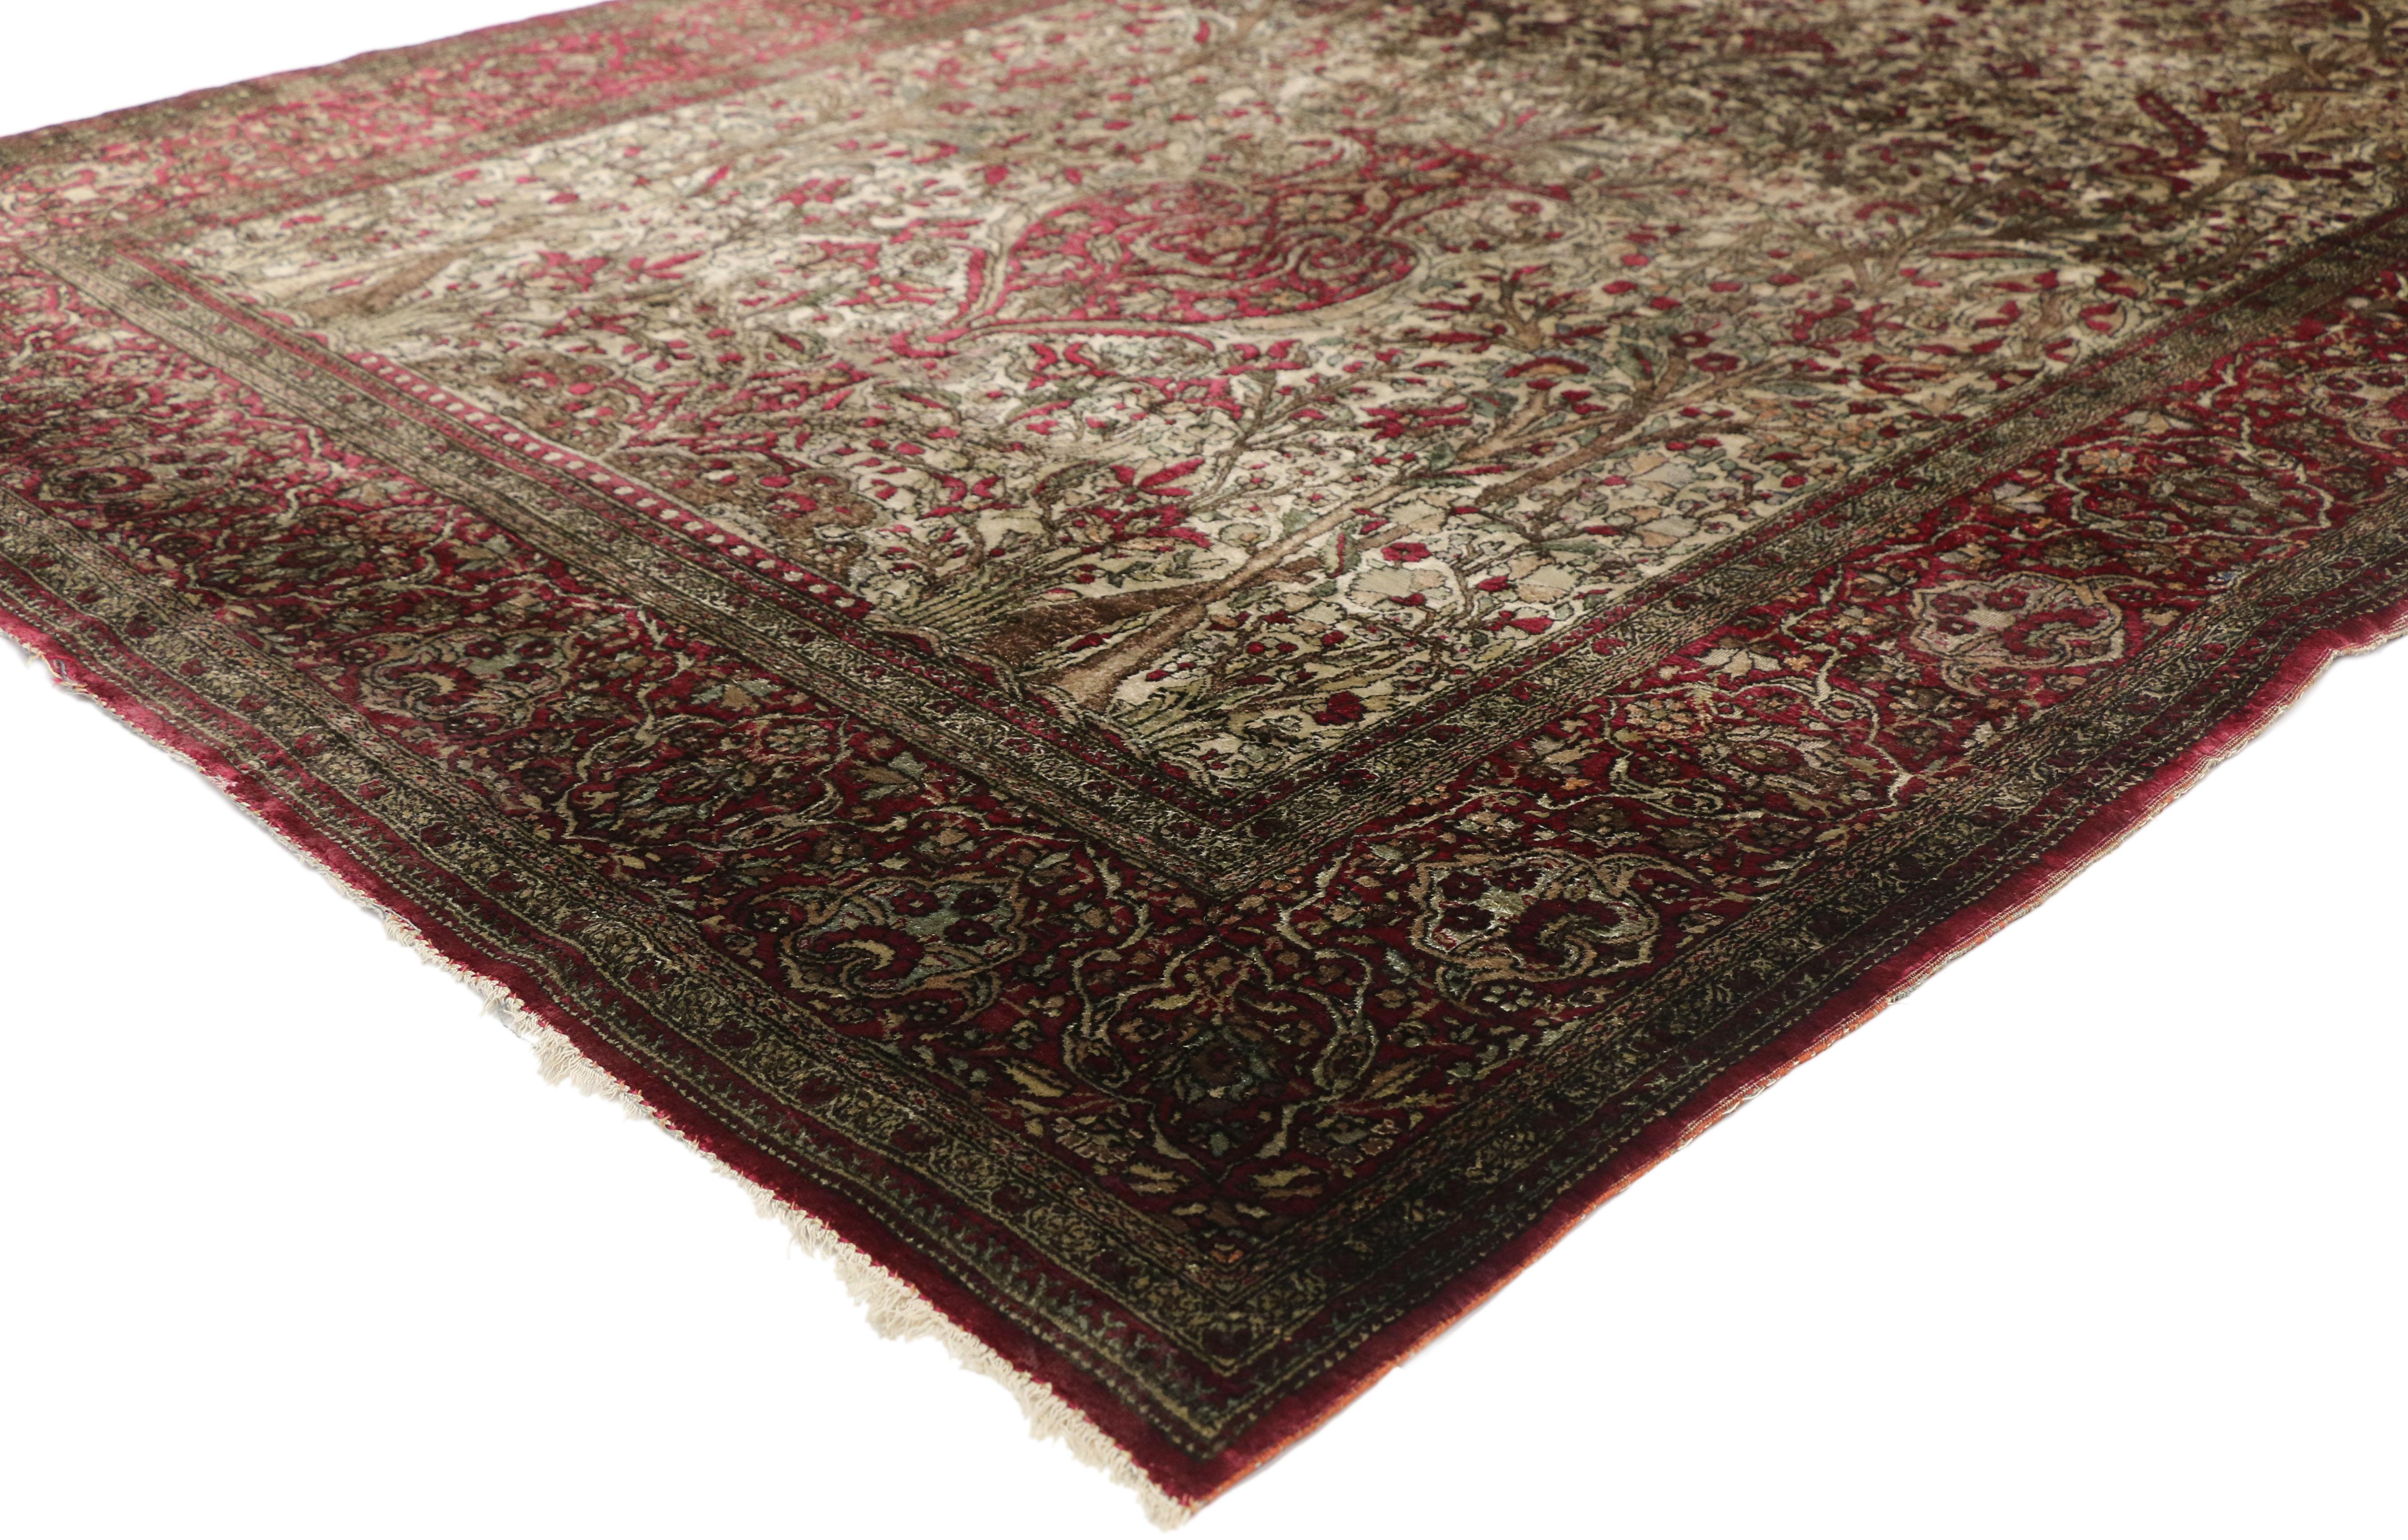 77269 Antique Persian Silk Kashan Prayer Rug, 04'04 x 06'08.
Behold, a vision of paradise! Feast your eyes upon this exquisite hand knotted antique Persian silk Kashan prayer rug, a true masterpiece that will transport you to a world of elegance and